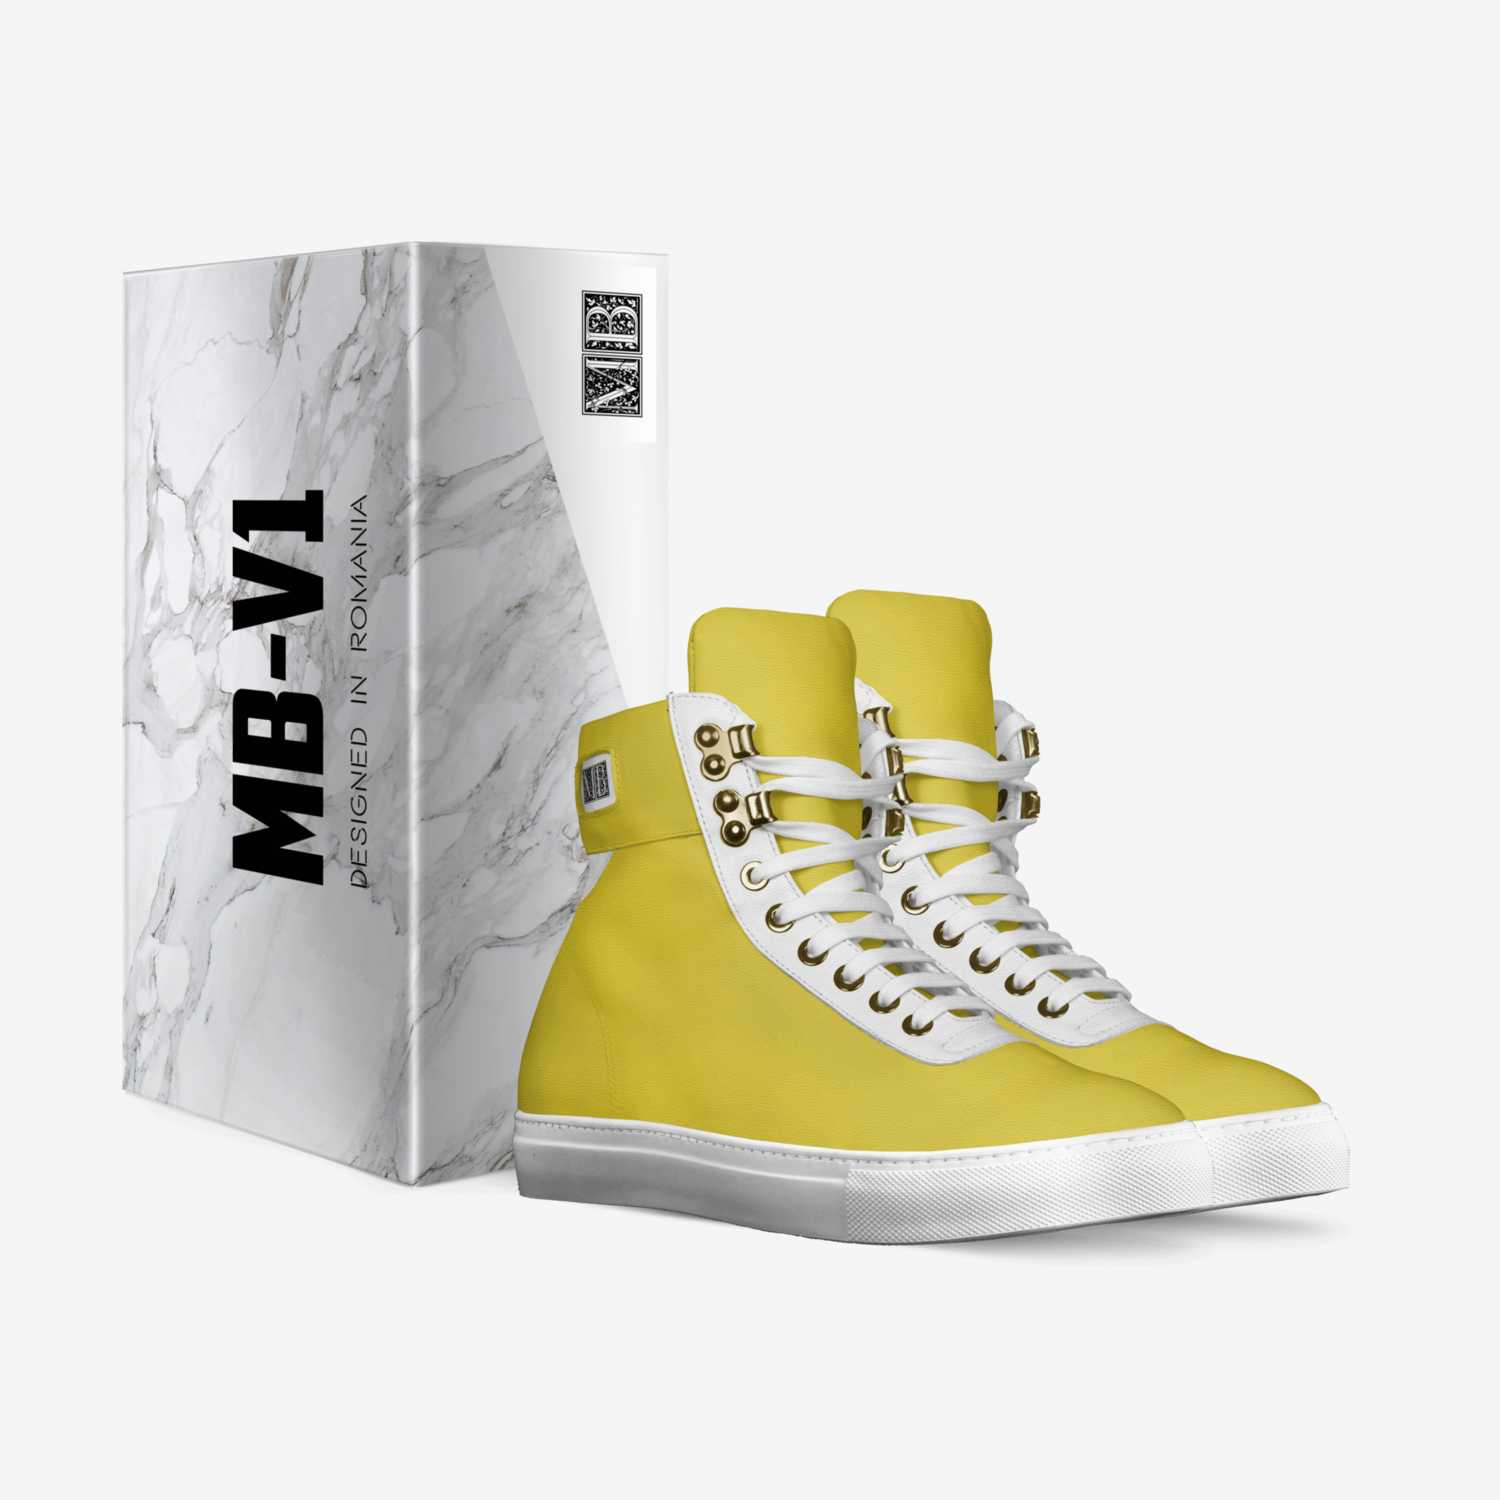 MBV1 custom made in Italy shoes by Mario Bubu | Box view